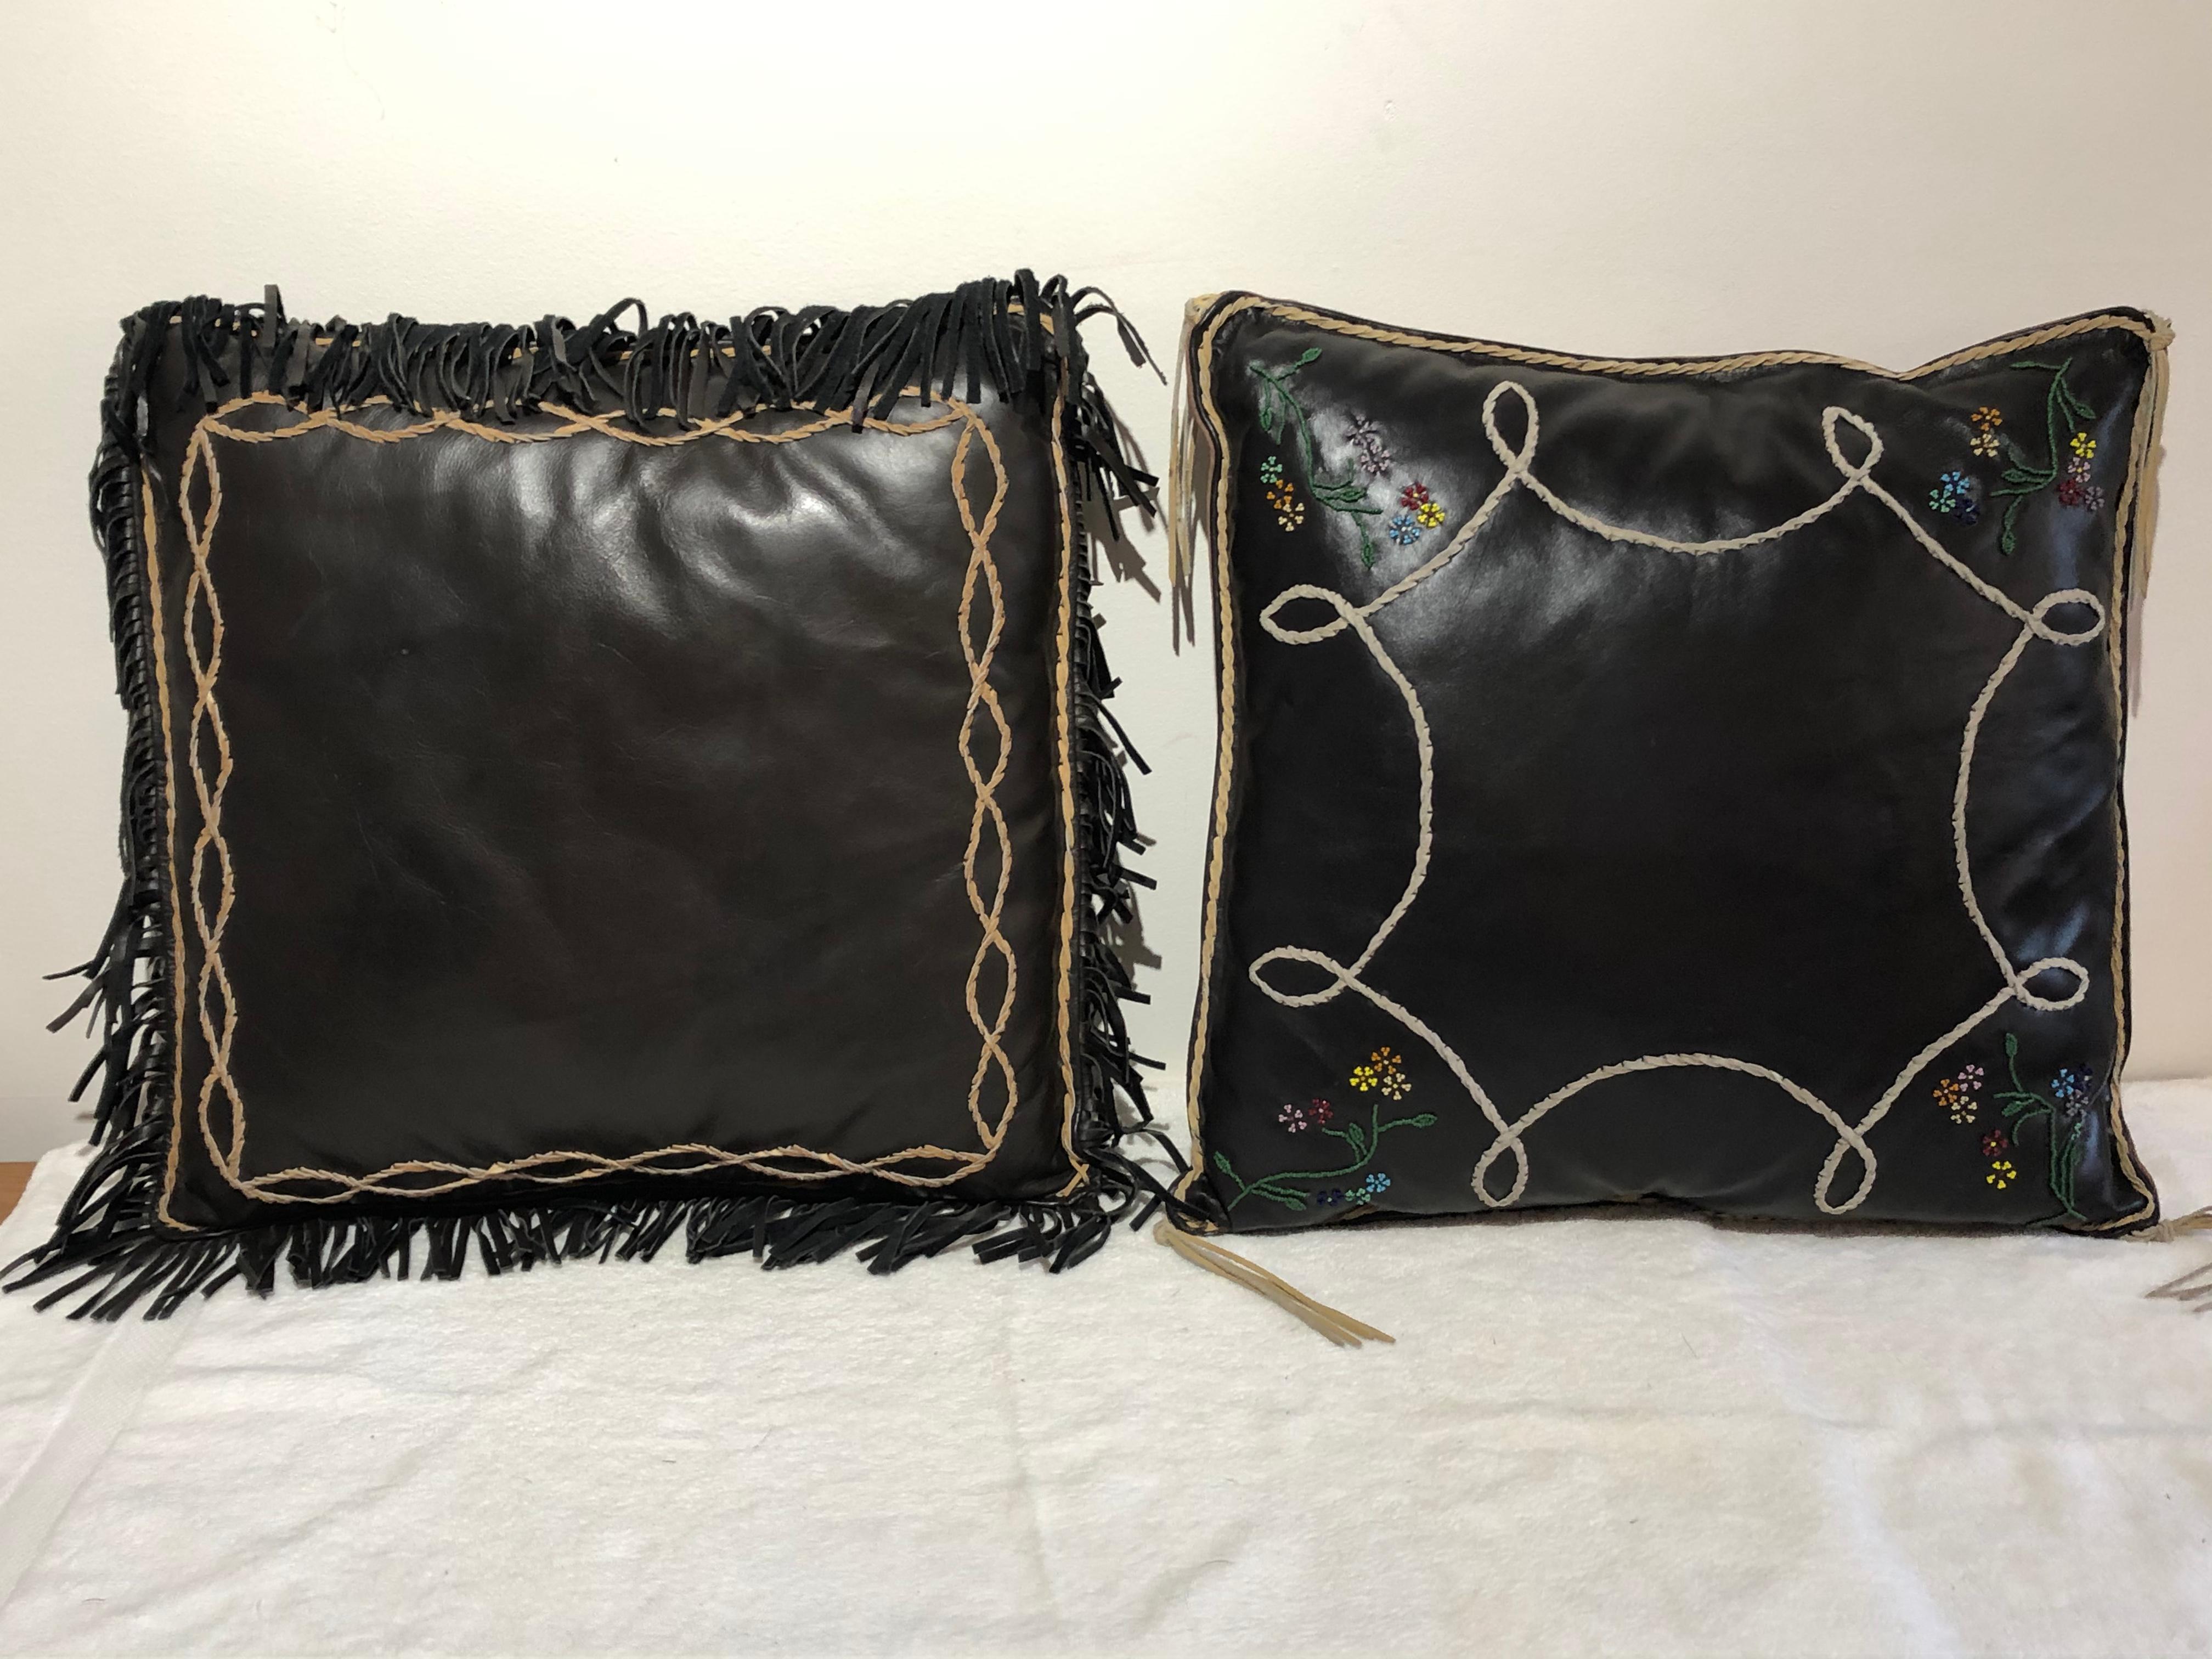 Handmade Leather Pillows Southwestern Style Embroidered, Beaded Hand Tooled 1